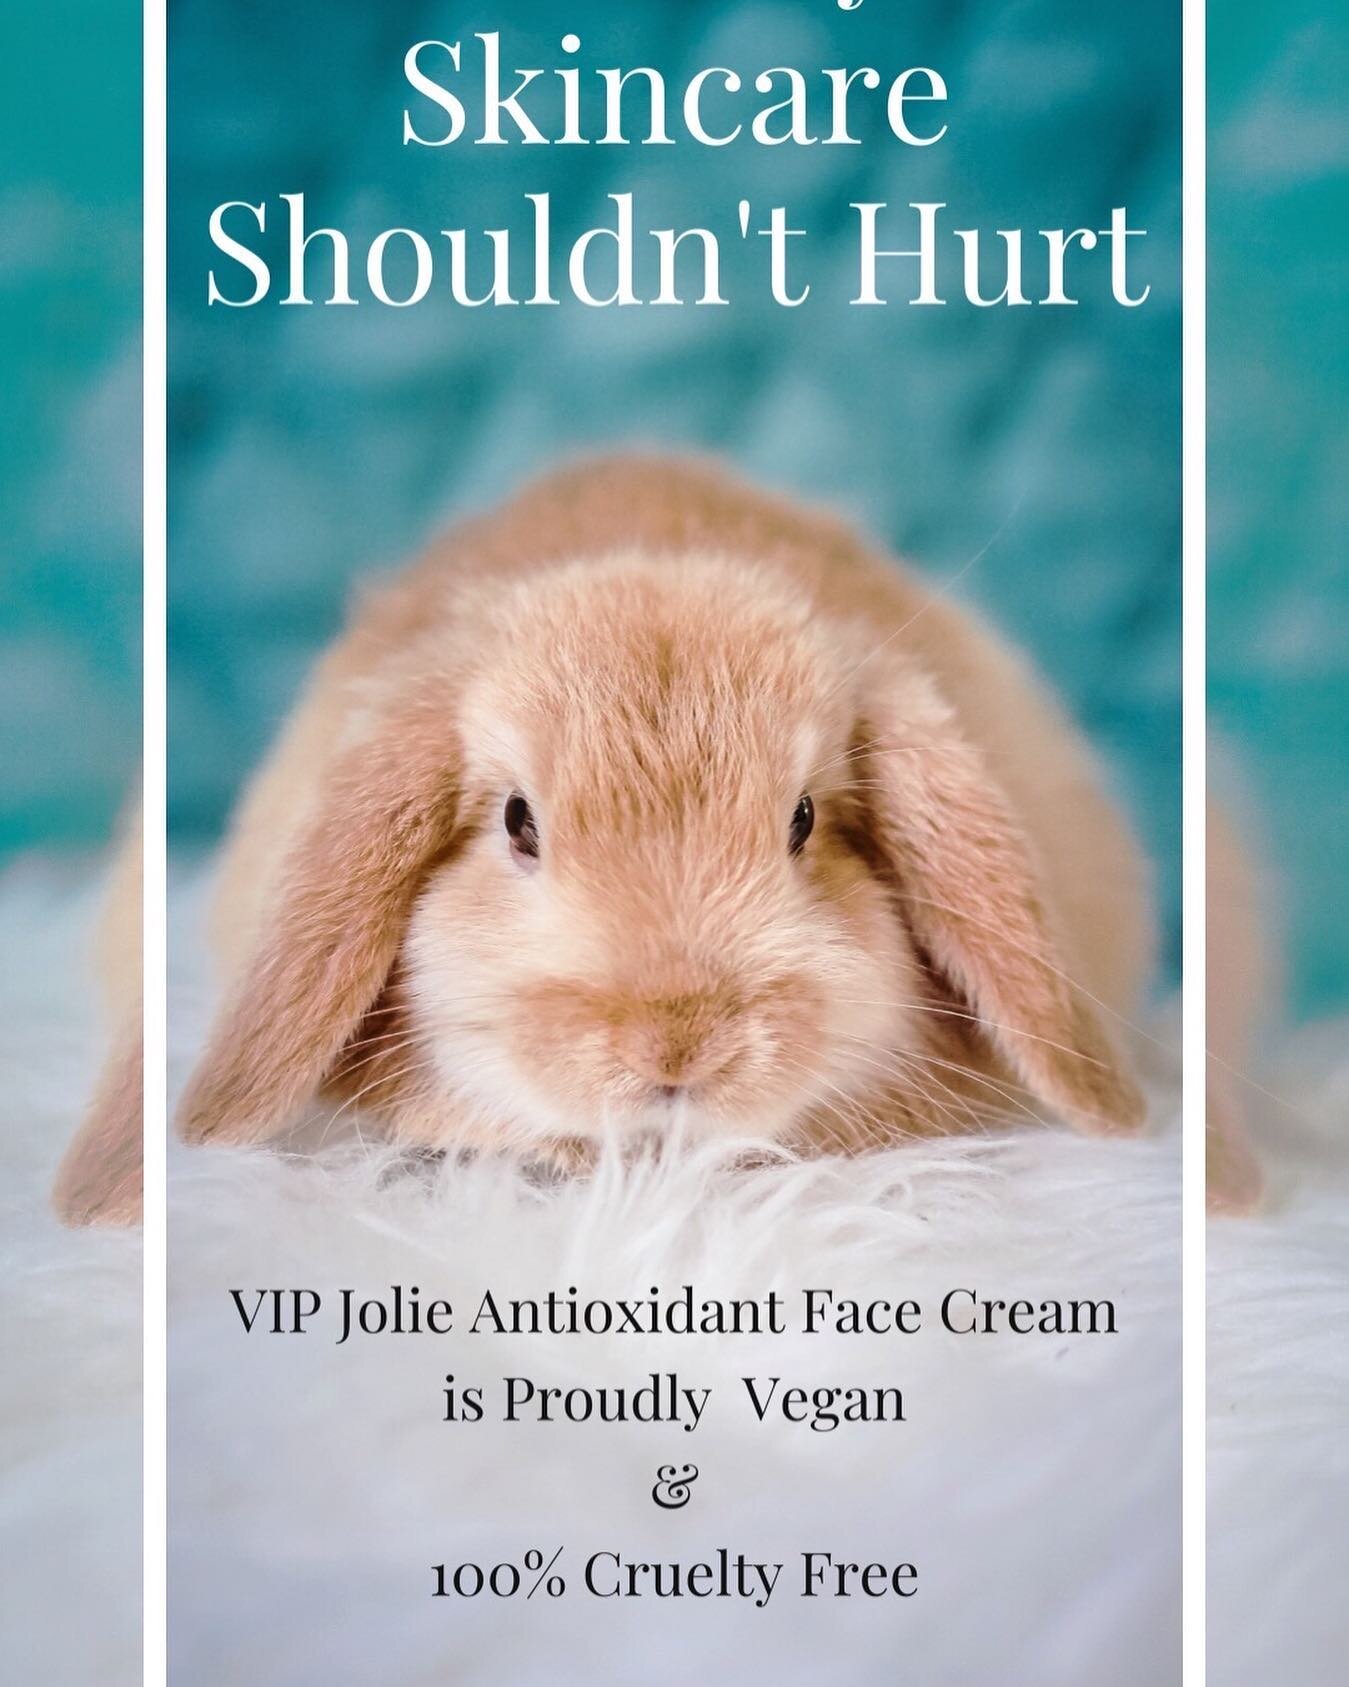 PSST&hellip;. We did it!🙌 🎉Come celebrate with us!

Our all-in-one moisturizing face cream is 100% cruelty free🐰&amp; Earth friendly🌏. 

Not only are our organic ingredients carefully selected to make sure you see REAL RESULTS from the start, but